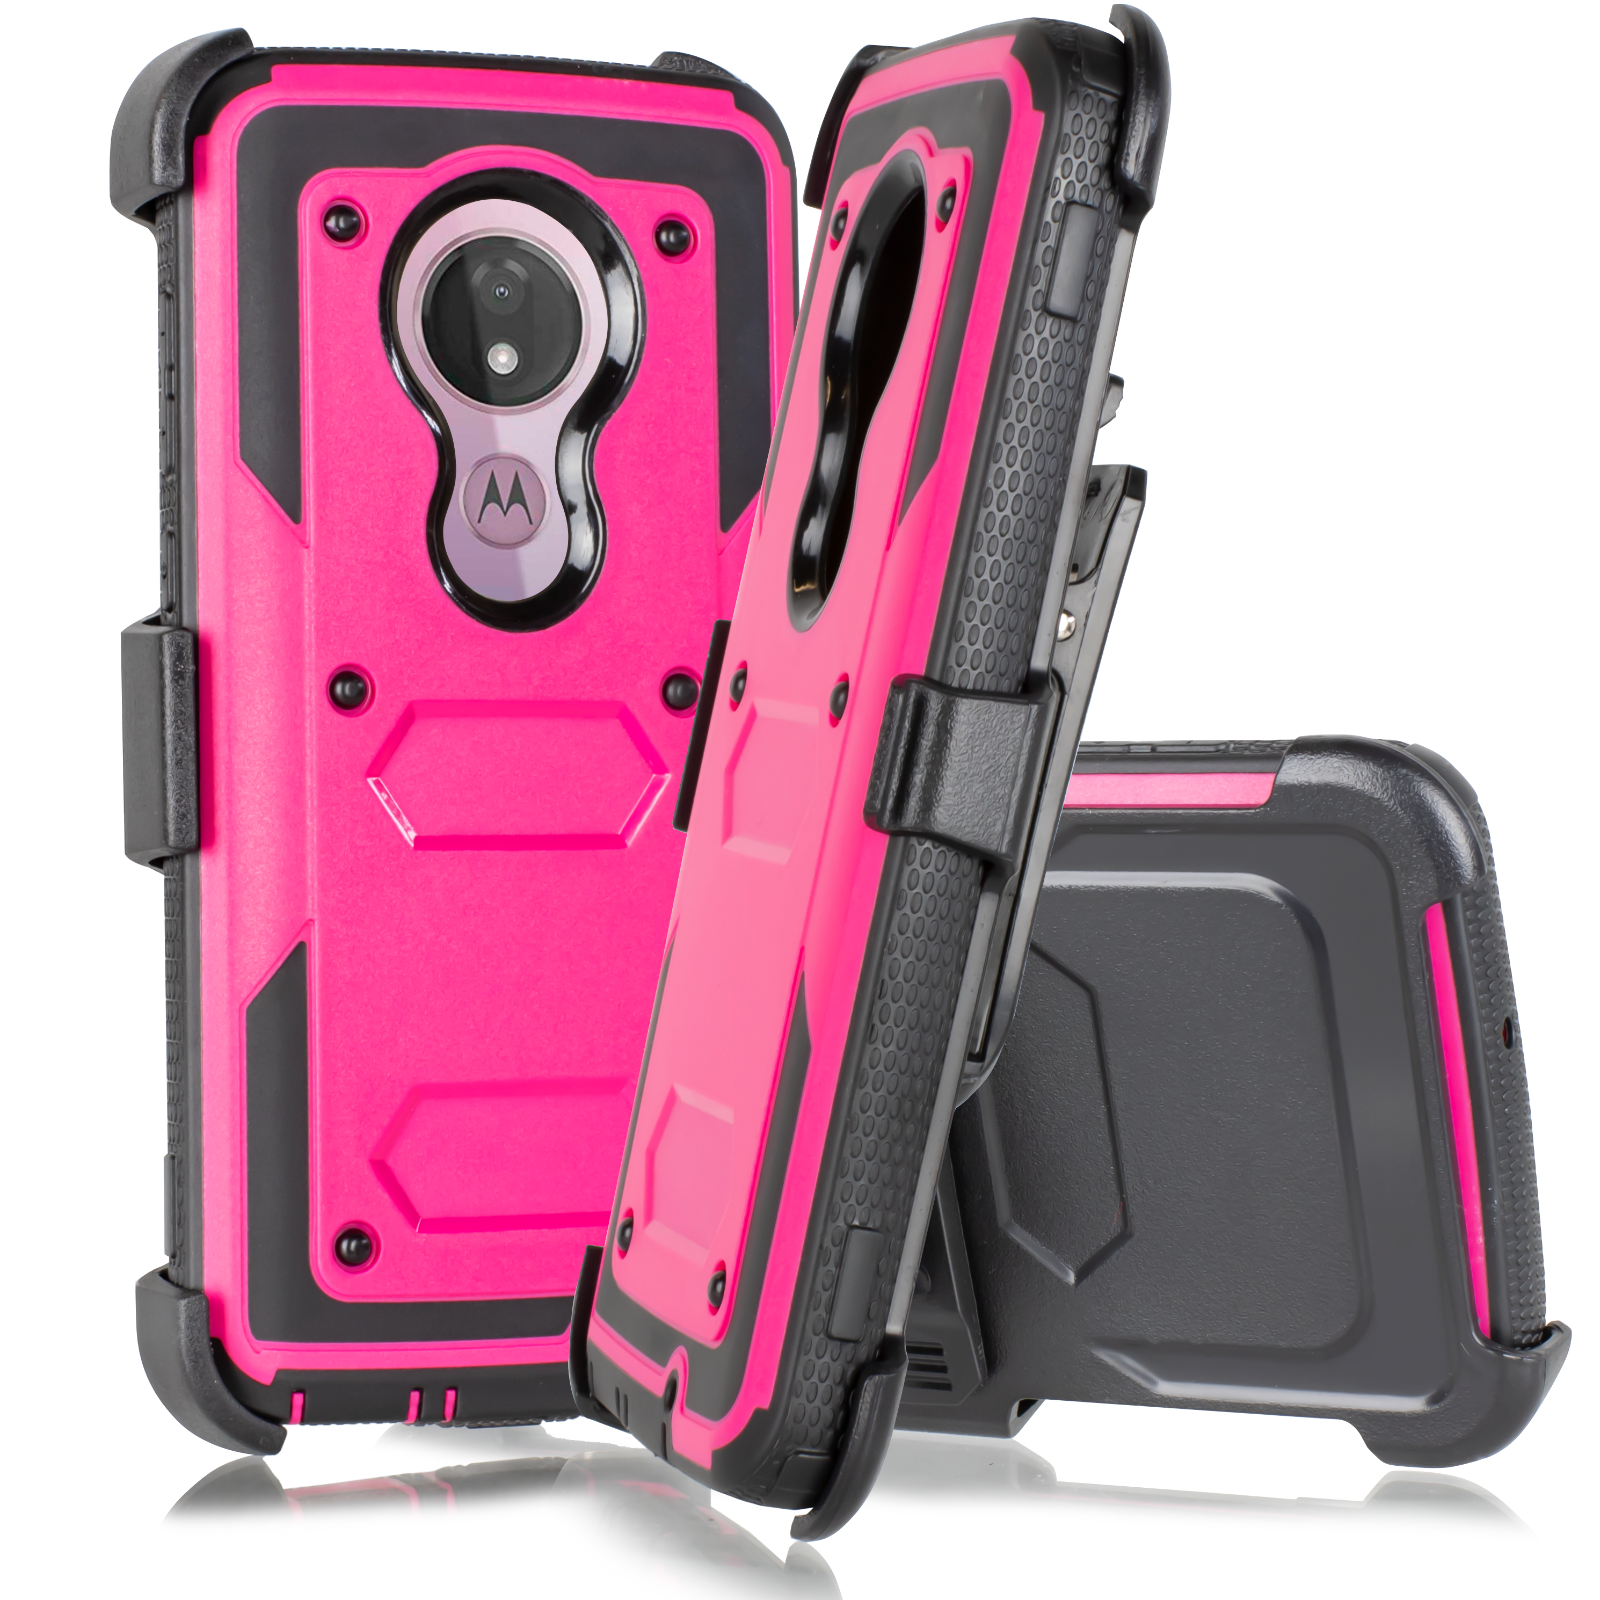 Value Pack ! for T-Mobile Revvlry+ Plus Case, Shockproof Full Body Protective Case Cover with Kickstand and Belt Swivel Clip Compatible with Motorola Moto G7 / Moto G7 Plus case Phone Case 360° (Pink) - image 4 of 4